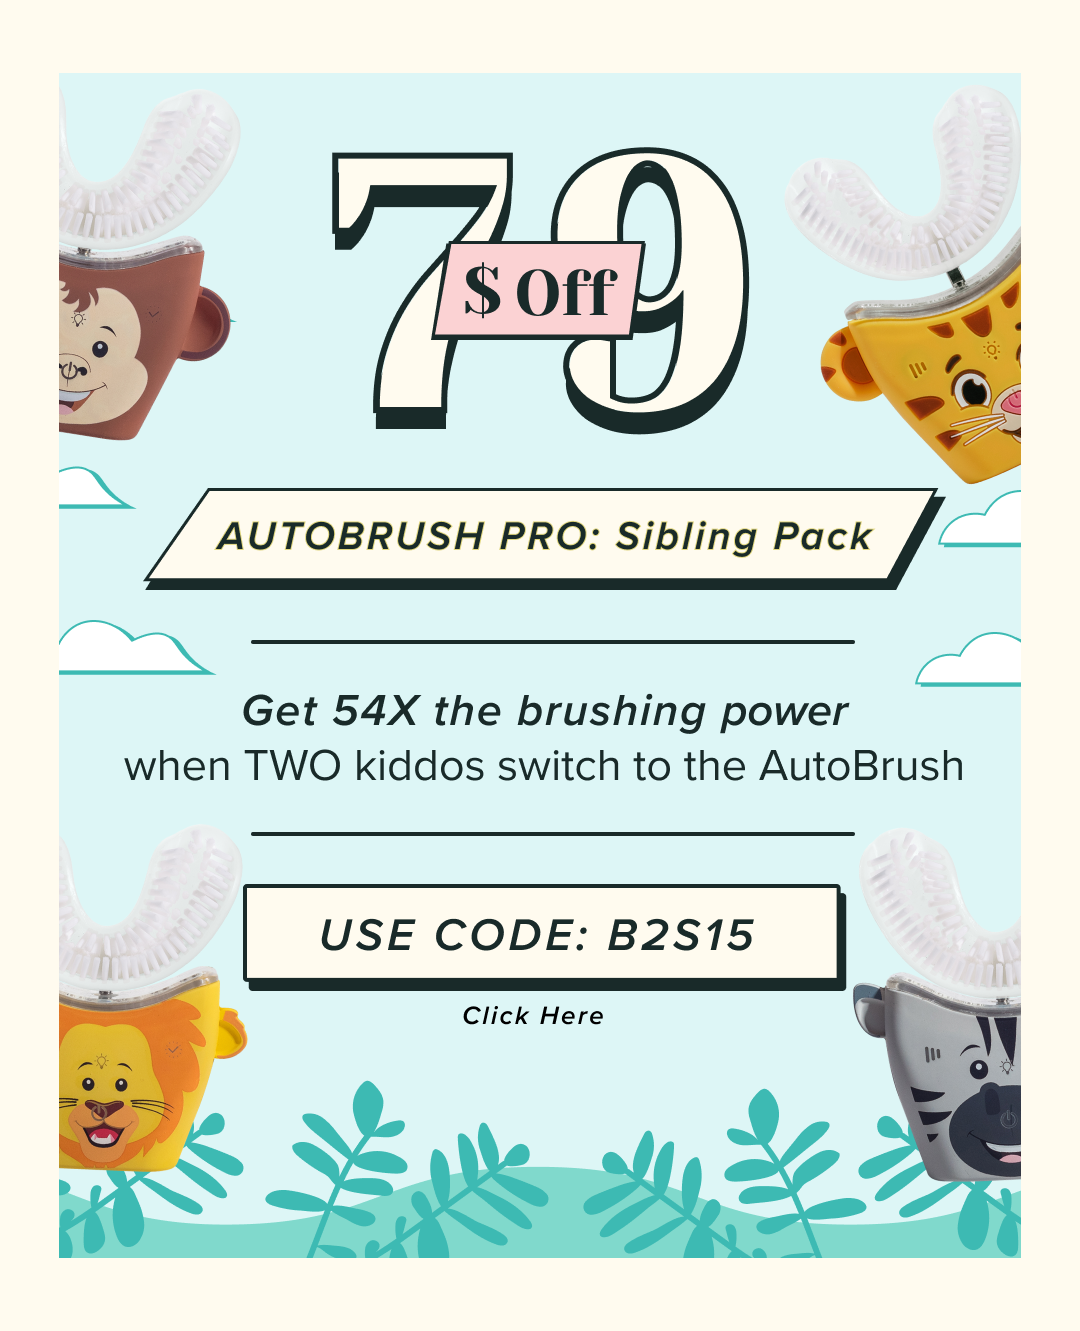 79$ off AutoBrush Pro: Sibling Pack